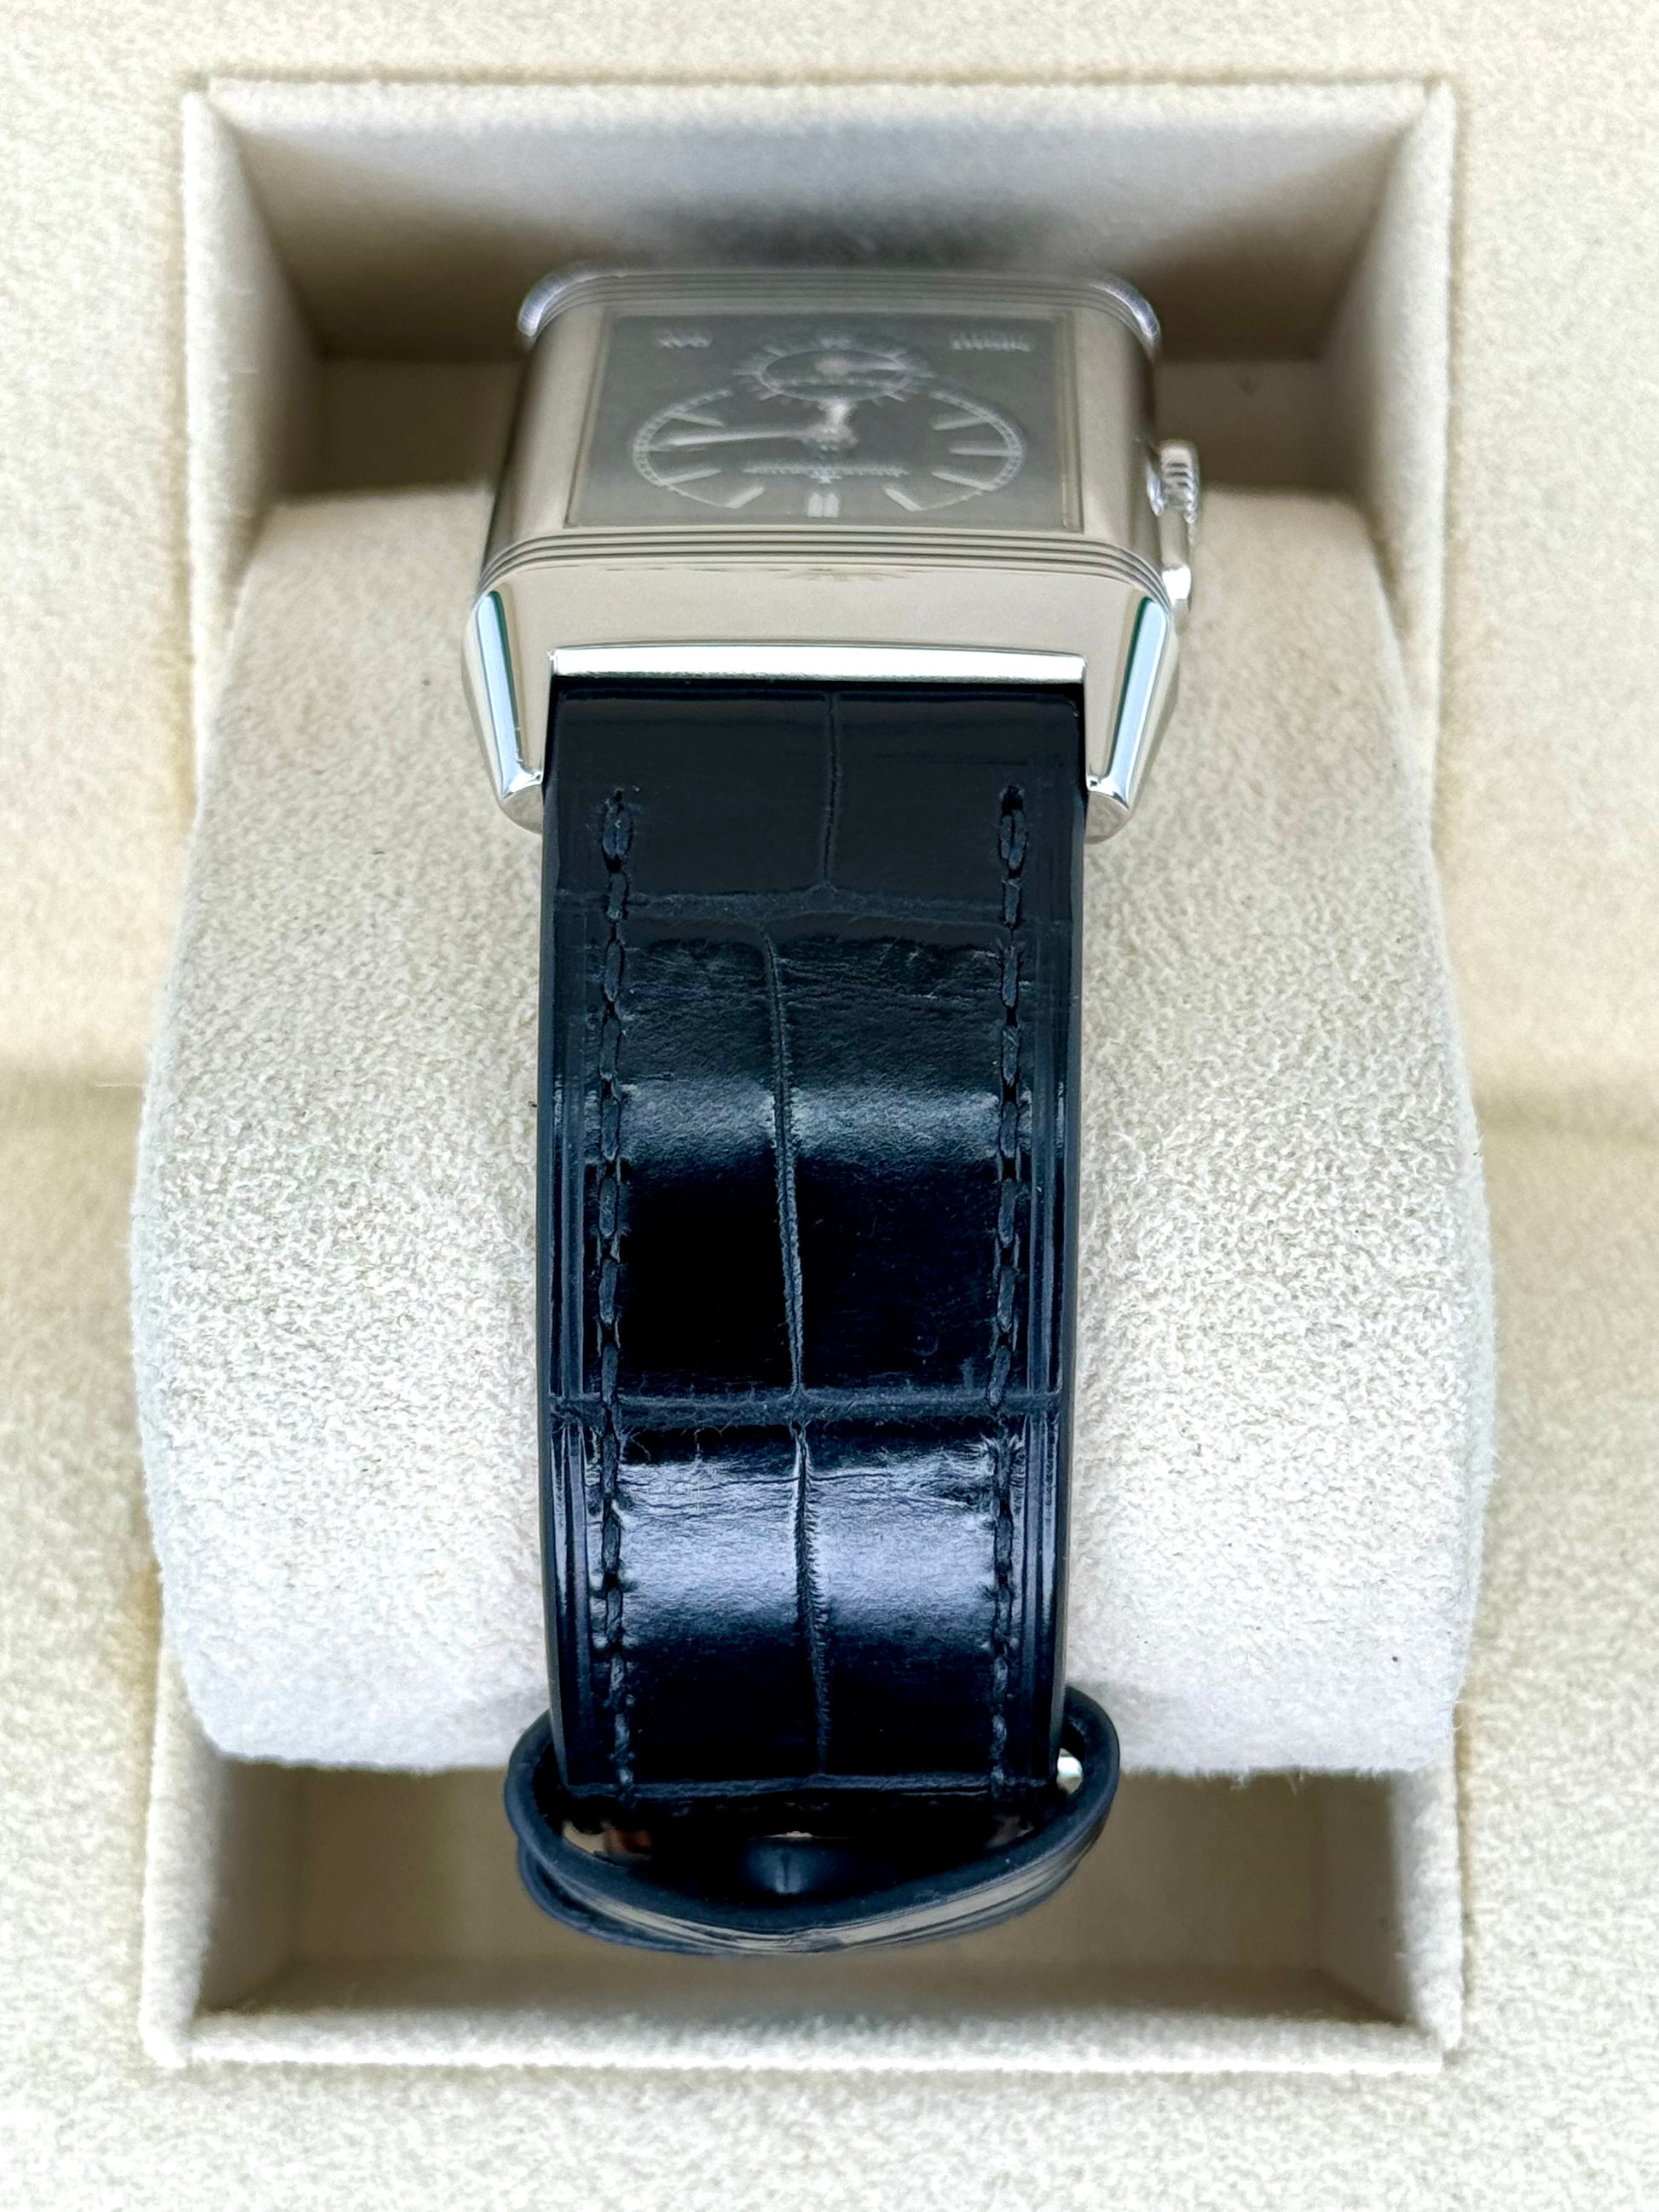 2016 Jaeger-LeCoultre Grande Reverso DuoFace 46.8mm Q3788570 Dual Dial - MyWatchLLC